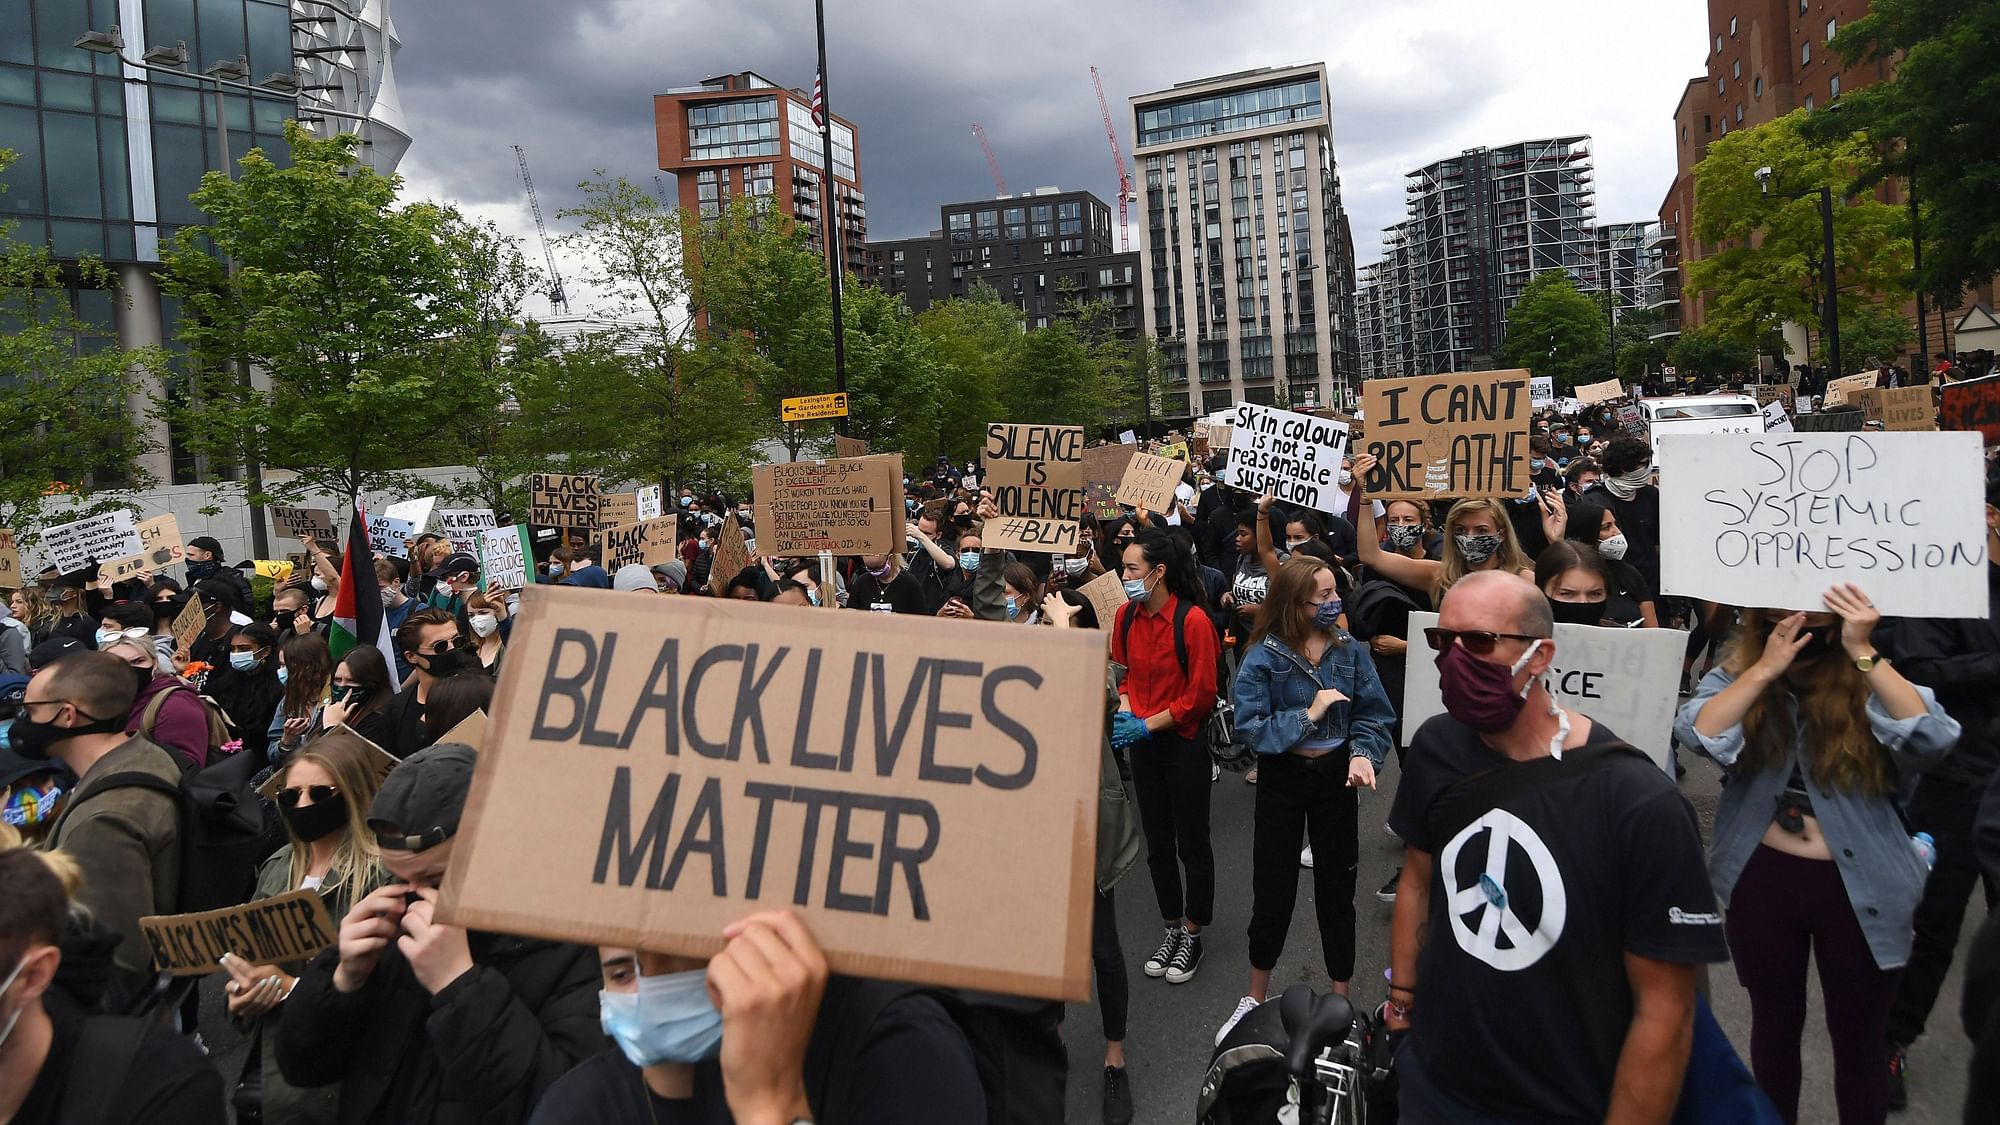 One person was killed on Saturday and the suspect detained at a Black Lives Matter protest in Texas.&nbsp;